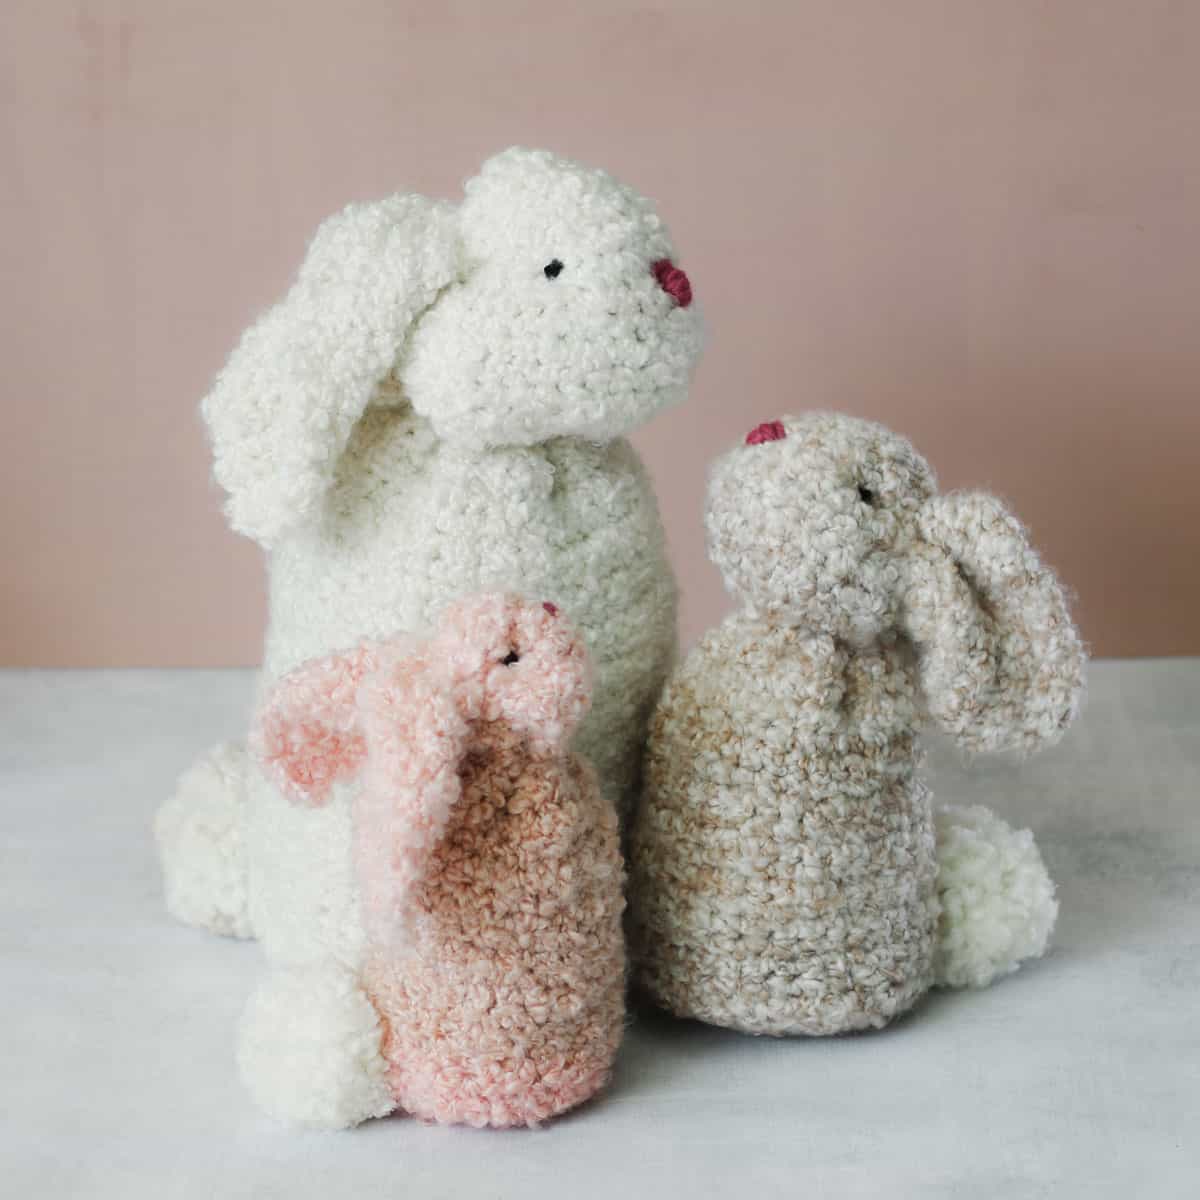 Three crochet bunnies made from rectangles and Lion Brand Homespun Thick & Quick yarn.